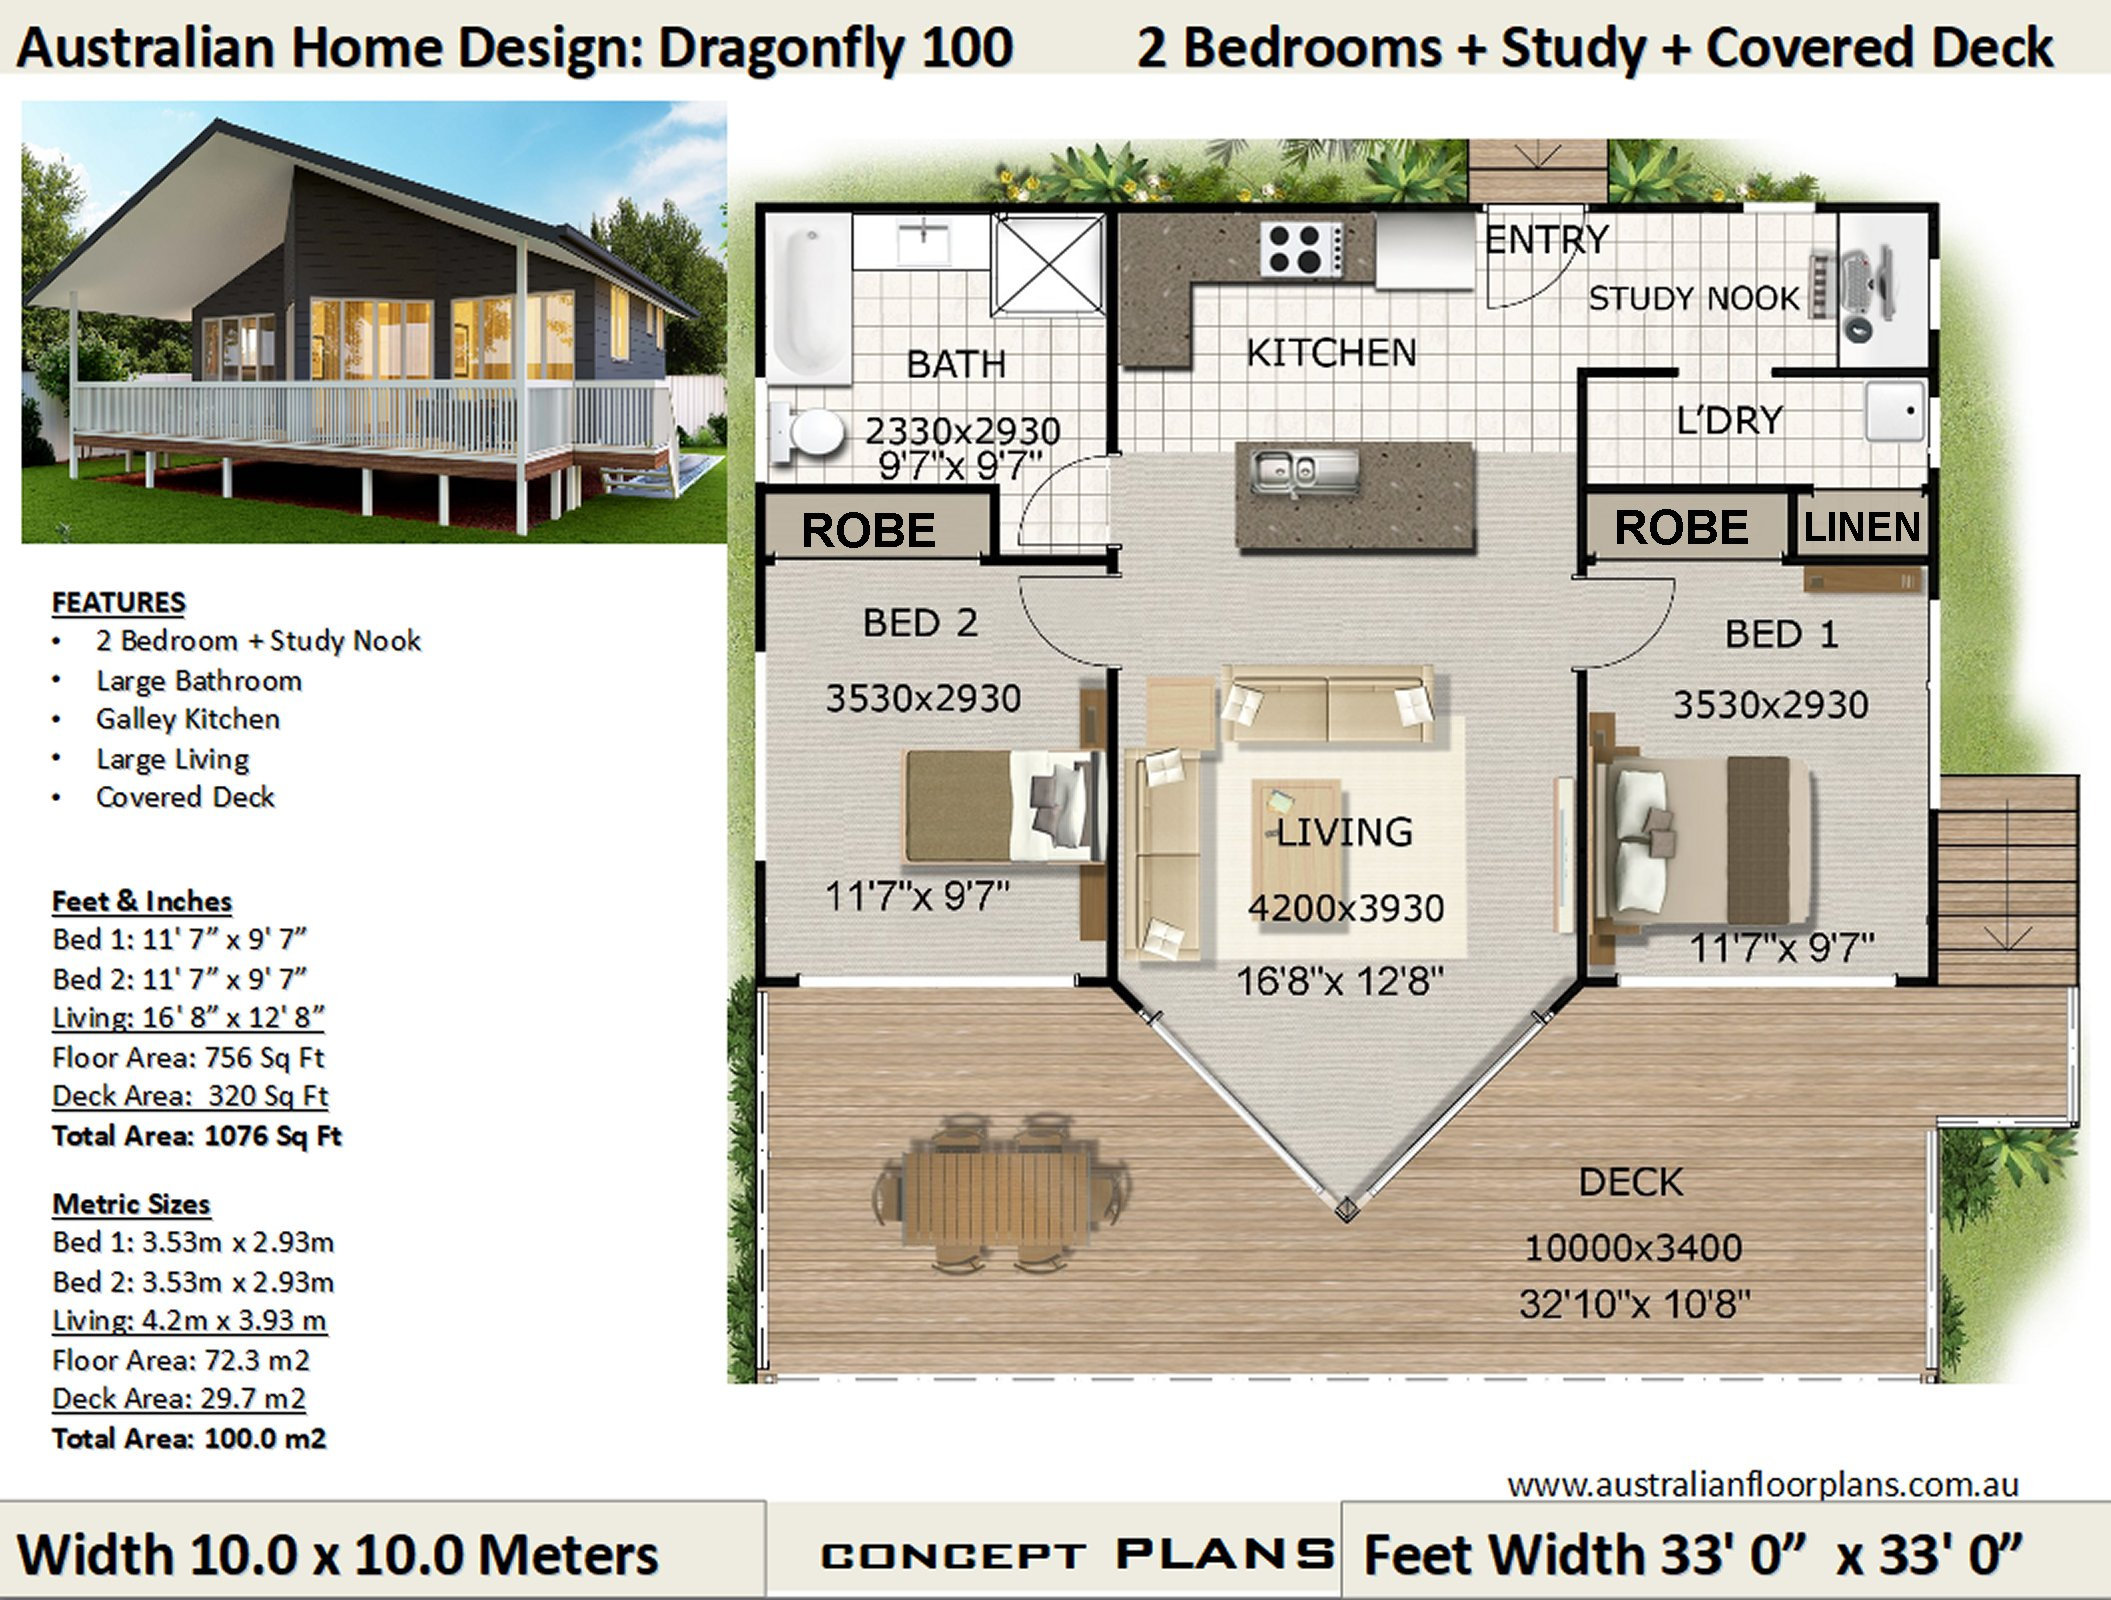 Granny Flat 2 Bedroom Home Plan 111 SBHLH 100 M2 1070 Sq. Foot Concept House  Plans for Sale 